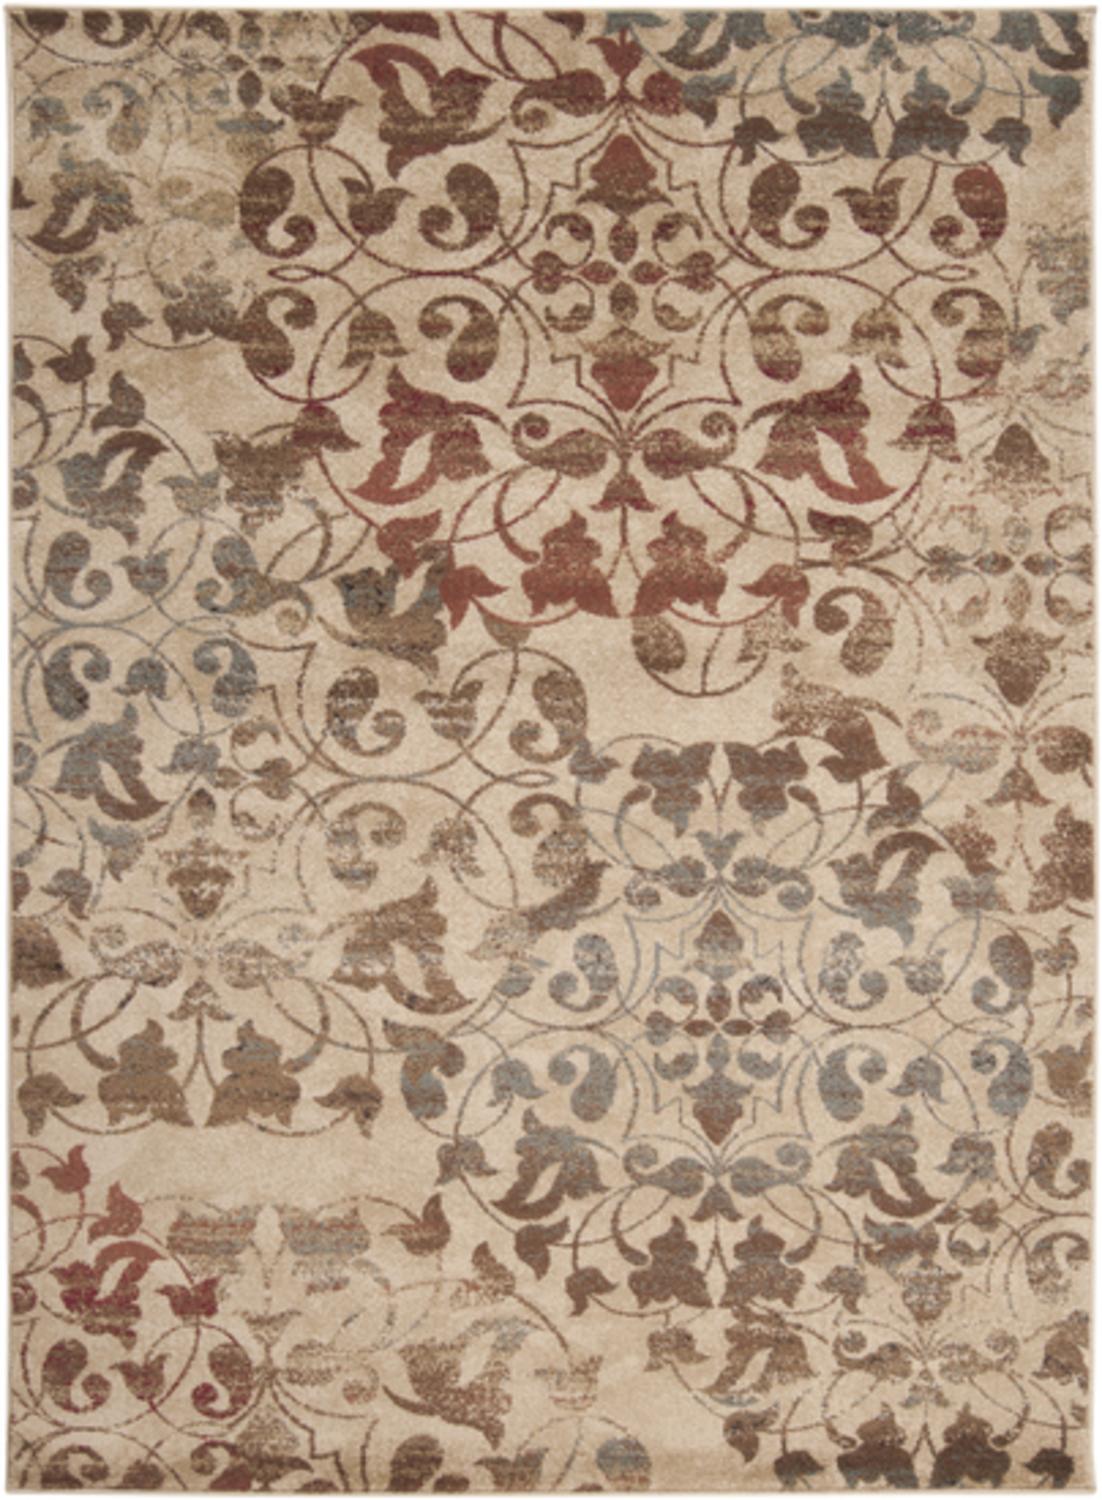 Diva At Home 7.85' x 10.85' Rustic Leaves Tan, Red and Brown Shed-Free Area Throw Rug